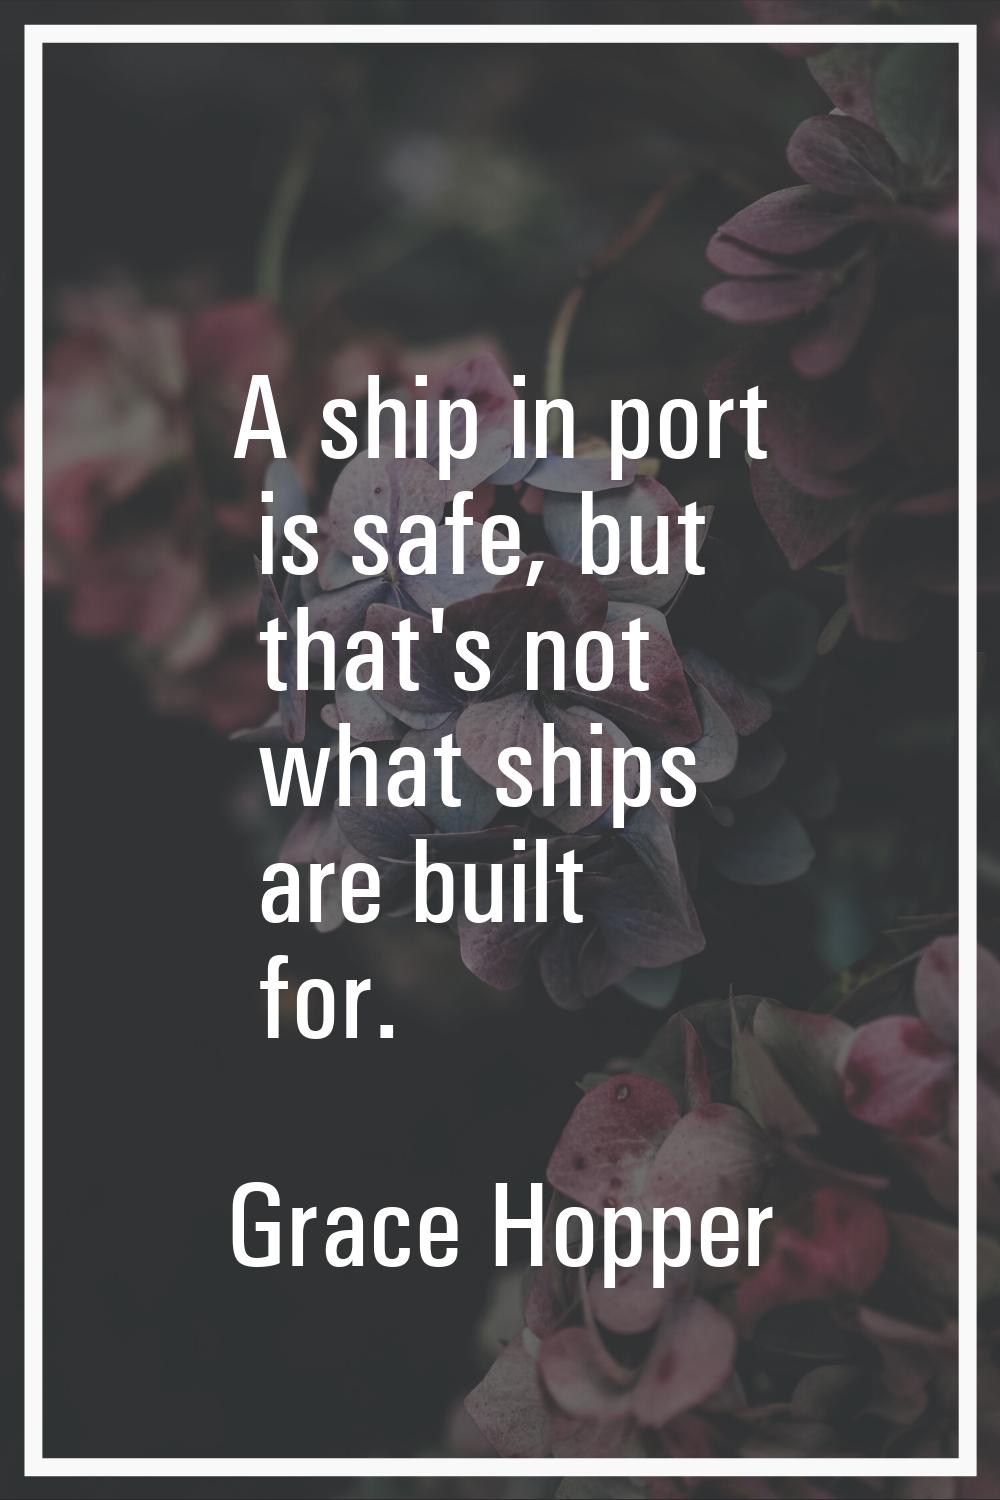 A ship in port is safe, but that's not what ships are built for.